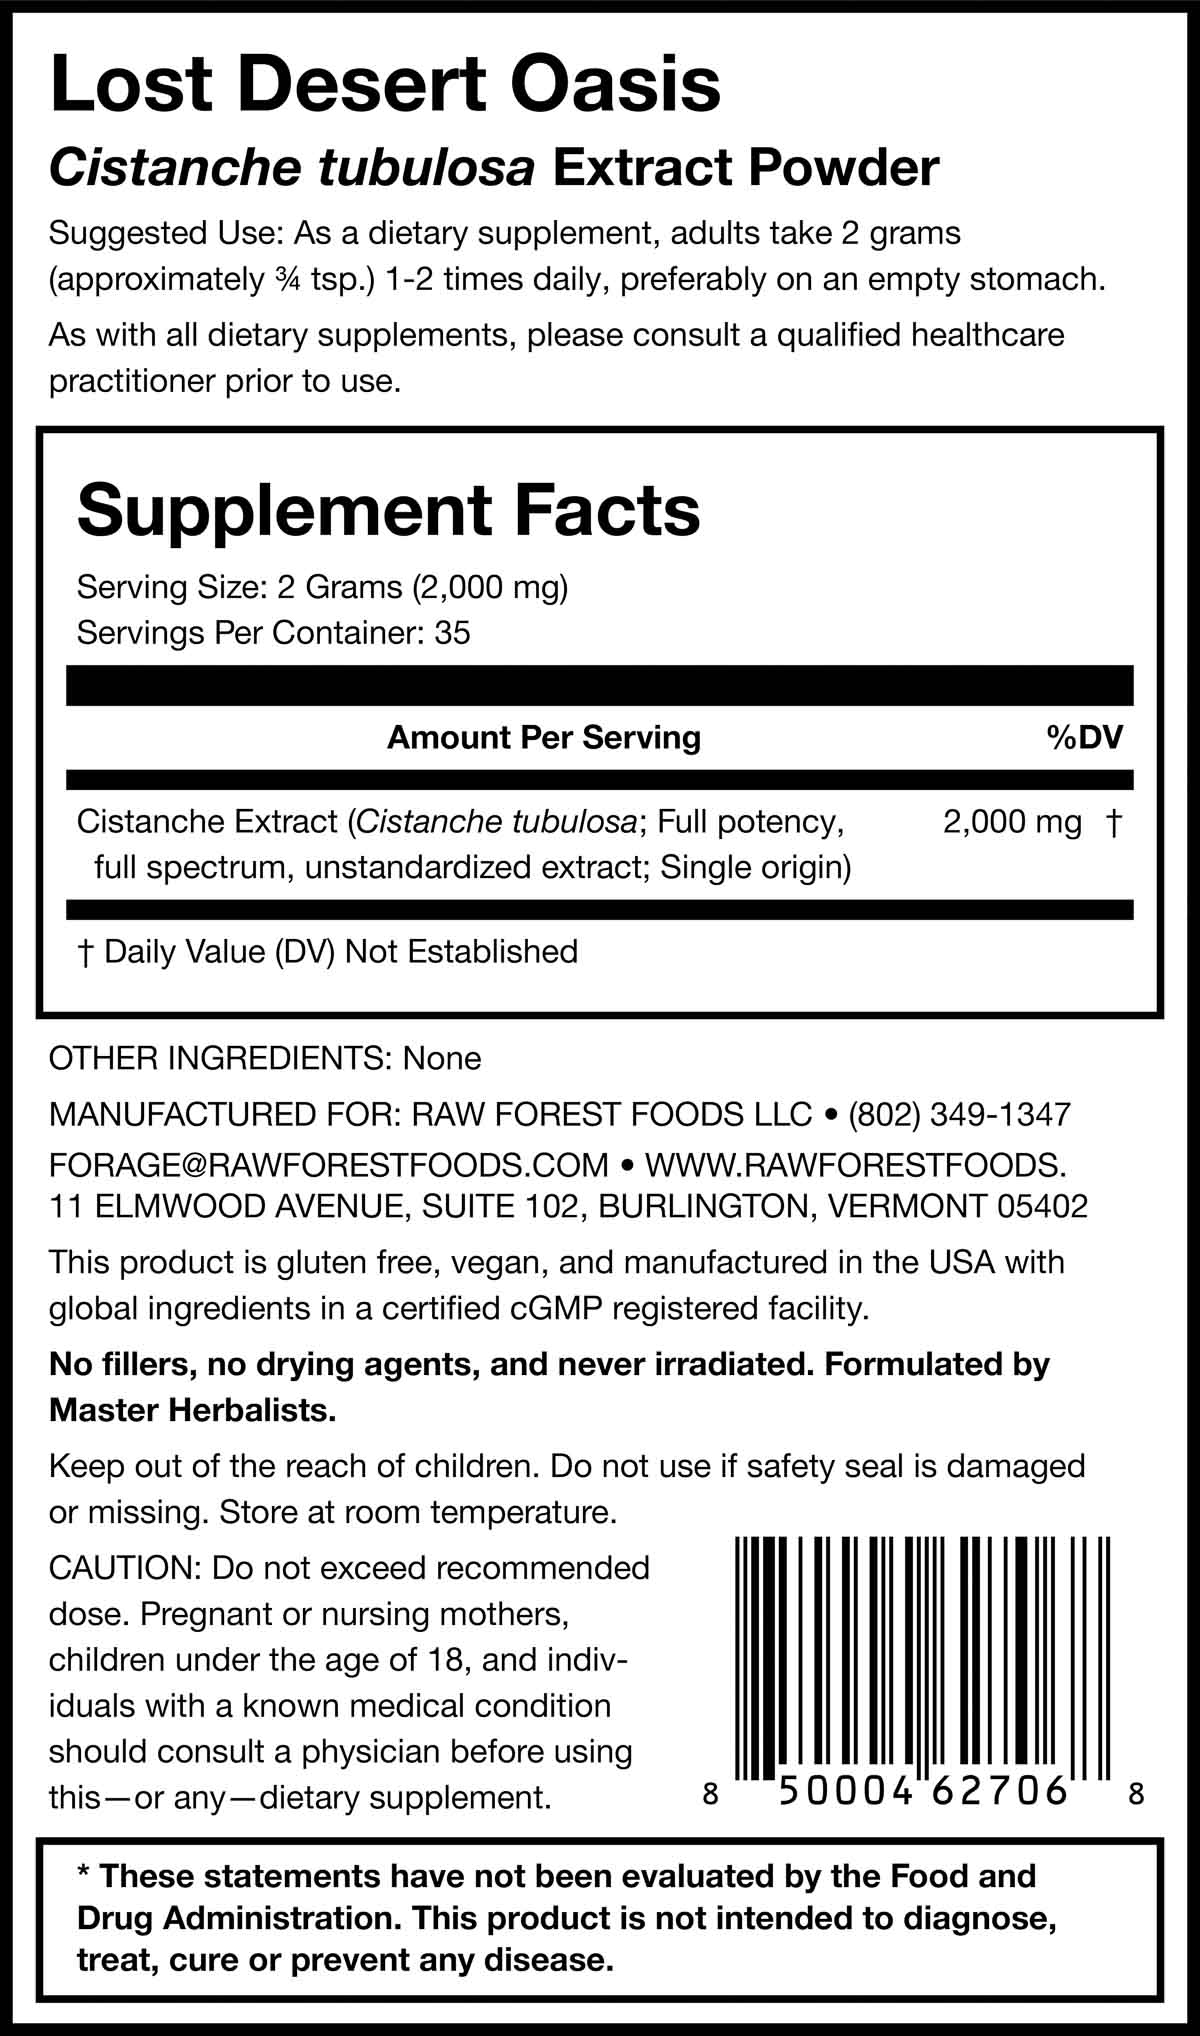 Lost Desert Oasis Cistanche tubulosa Extract Powder Supplement Facts Panel